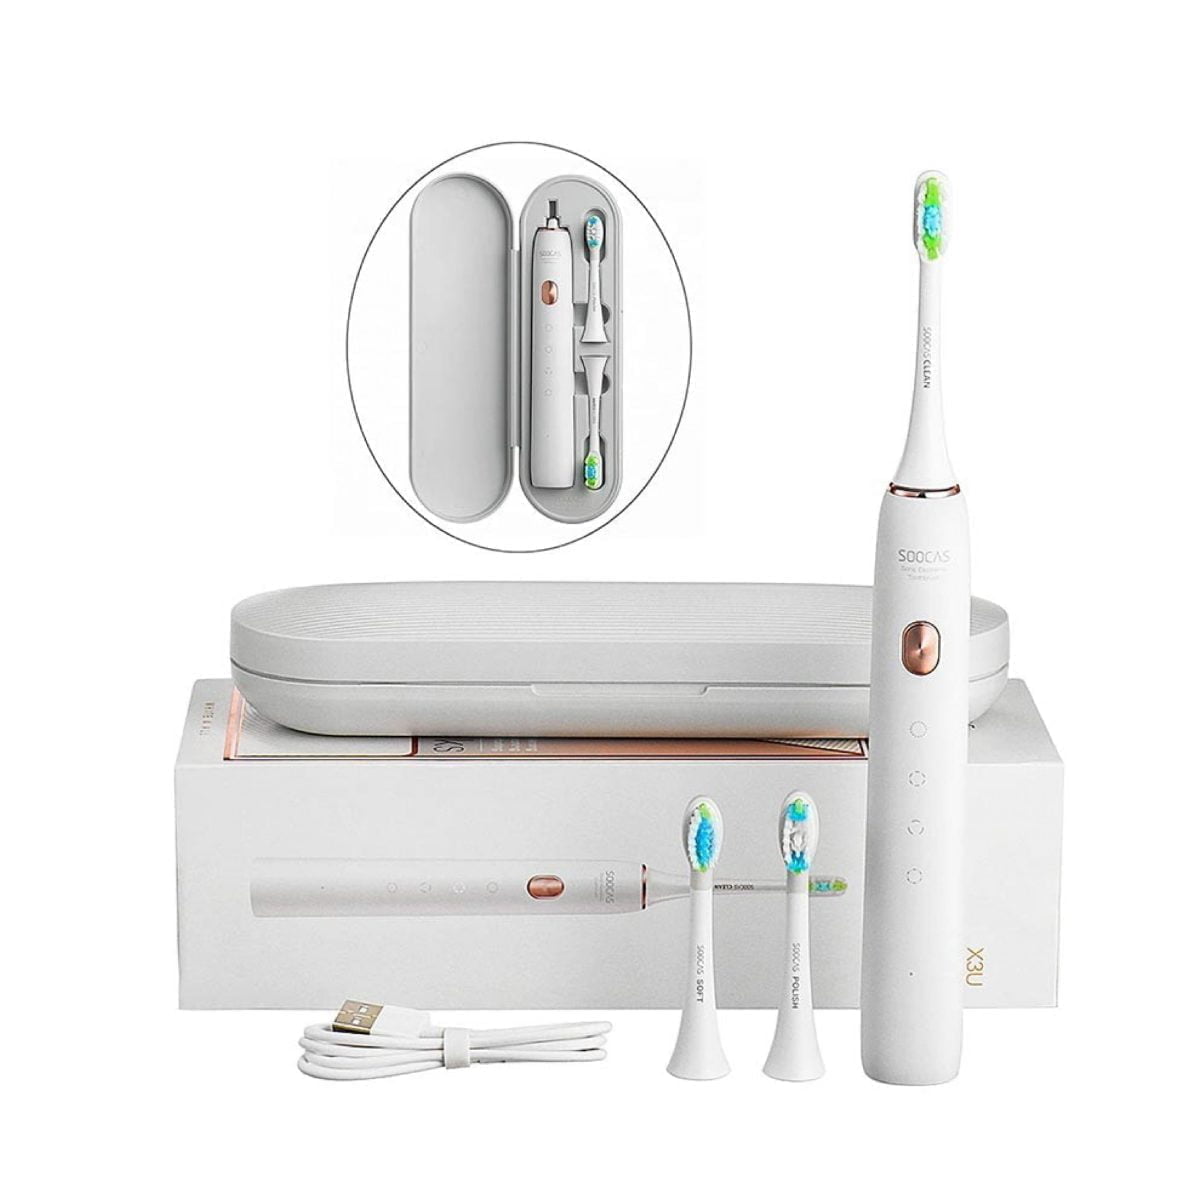 Waswhite 03 Scaled Xiaomi Xiaomi Toothbrush Soocare X3U, Soocas Upgraded Electric Sonic Vibration Waterproof Lightning-Fast Charging 2020 Newest Version [Video Width=&Quot;1280&Quot; Height=&Quot;720&Quot; Mp4=&Quot;Https://Lablaab.com/Wp-Content/Uploads/2020/05/Khn4Gzxy4Rcnwtethdd__Hd.mp4&Quot;][/Video] Soocas X3U Sonic Toothbrush Electric (White) 2020 Model